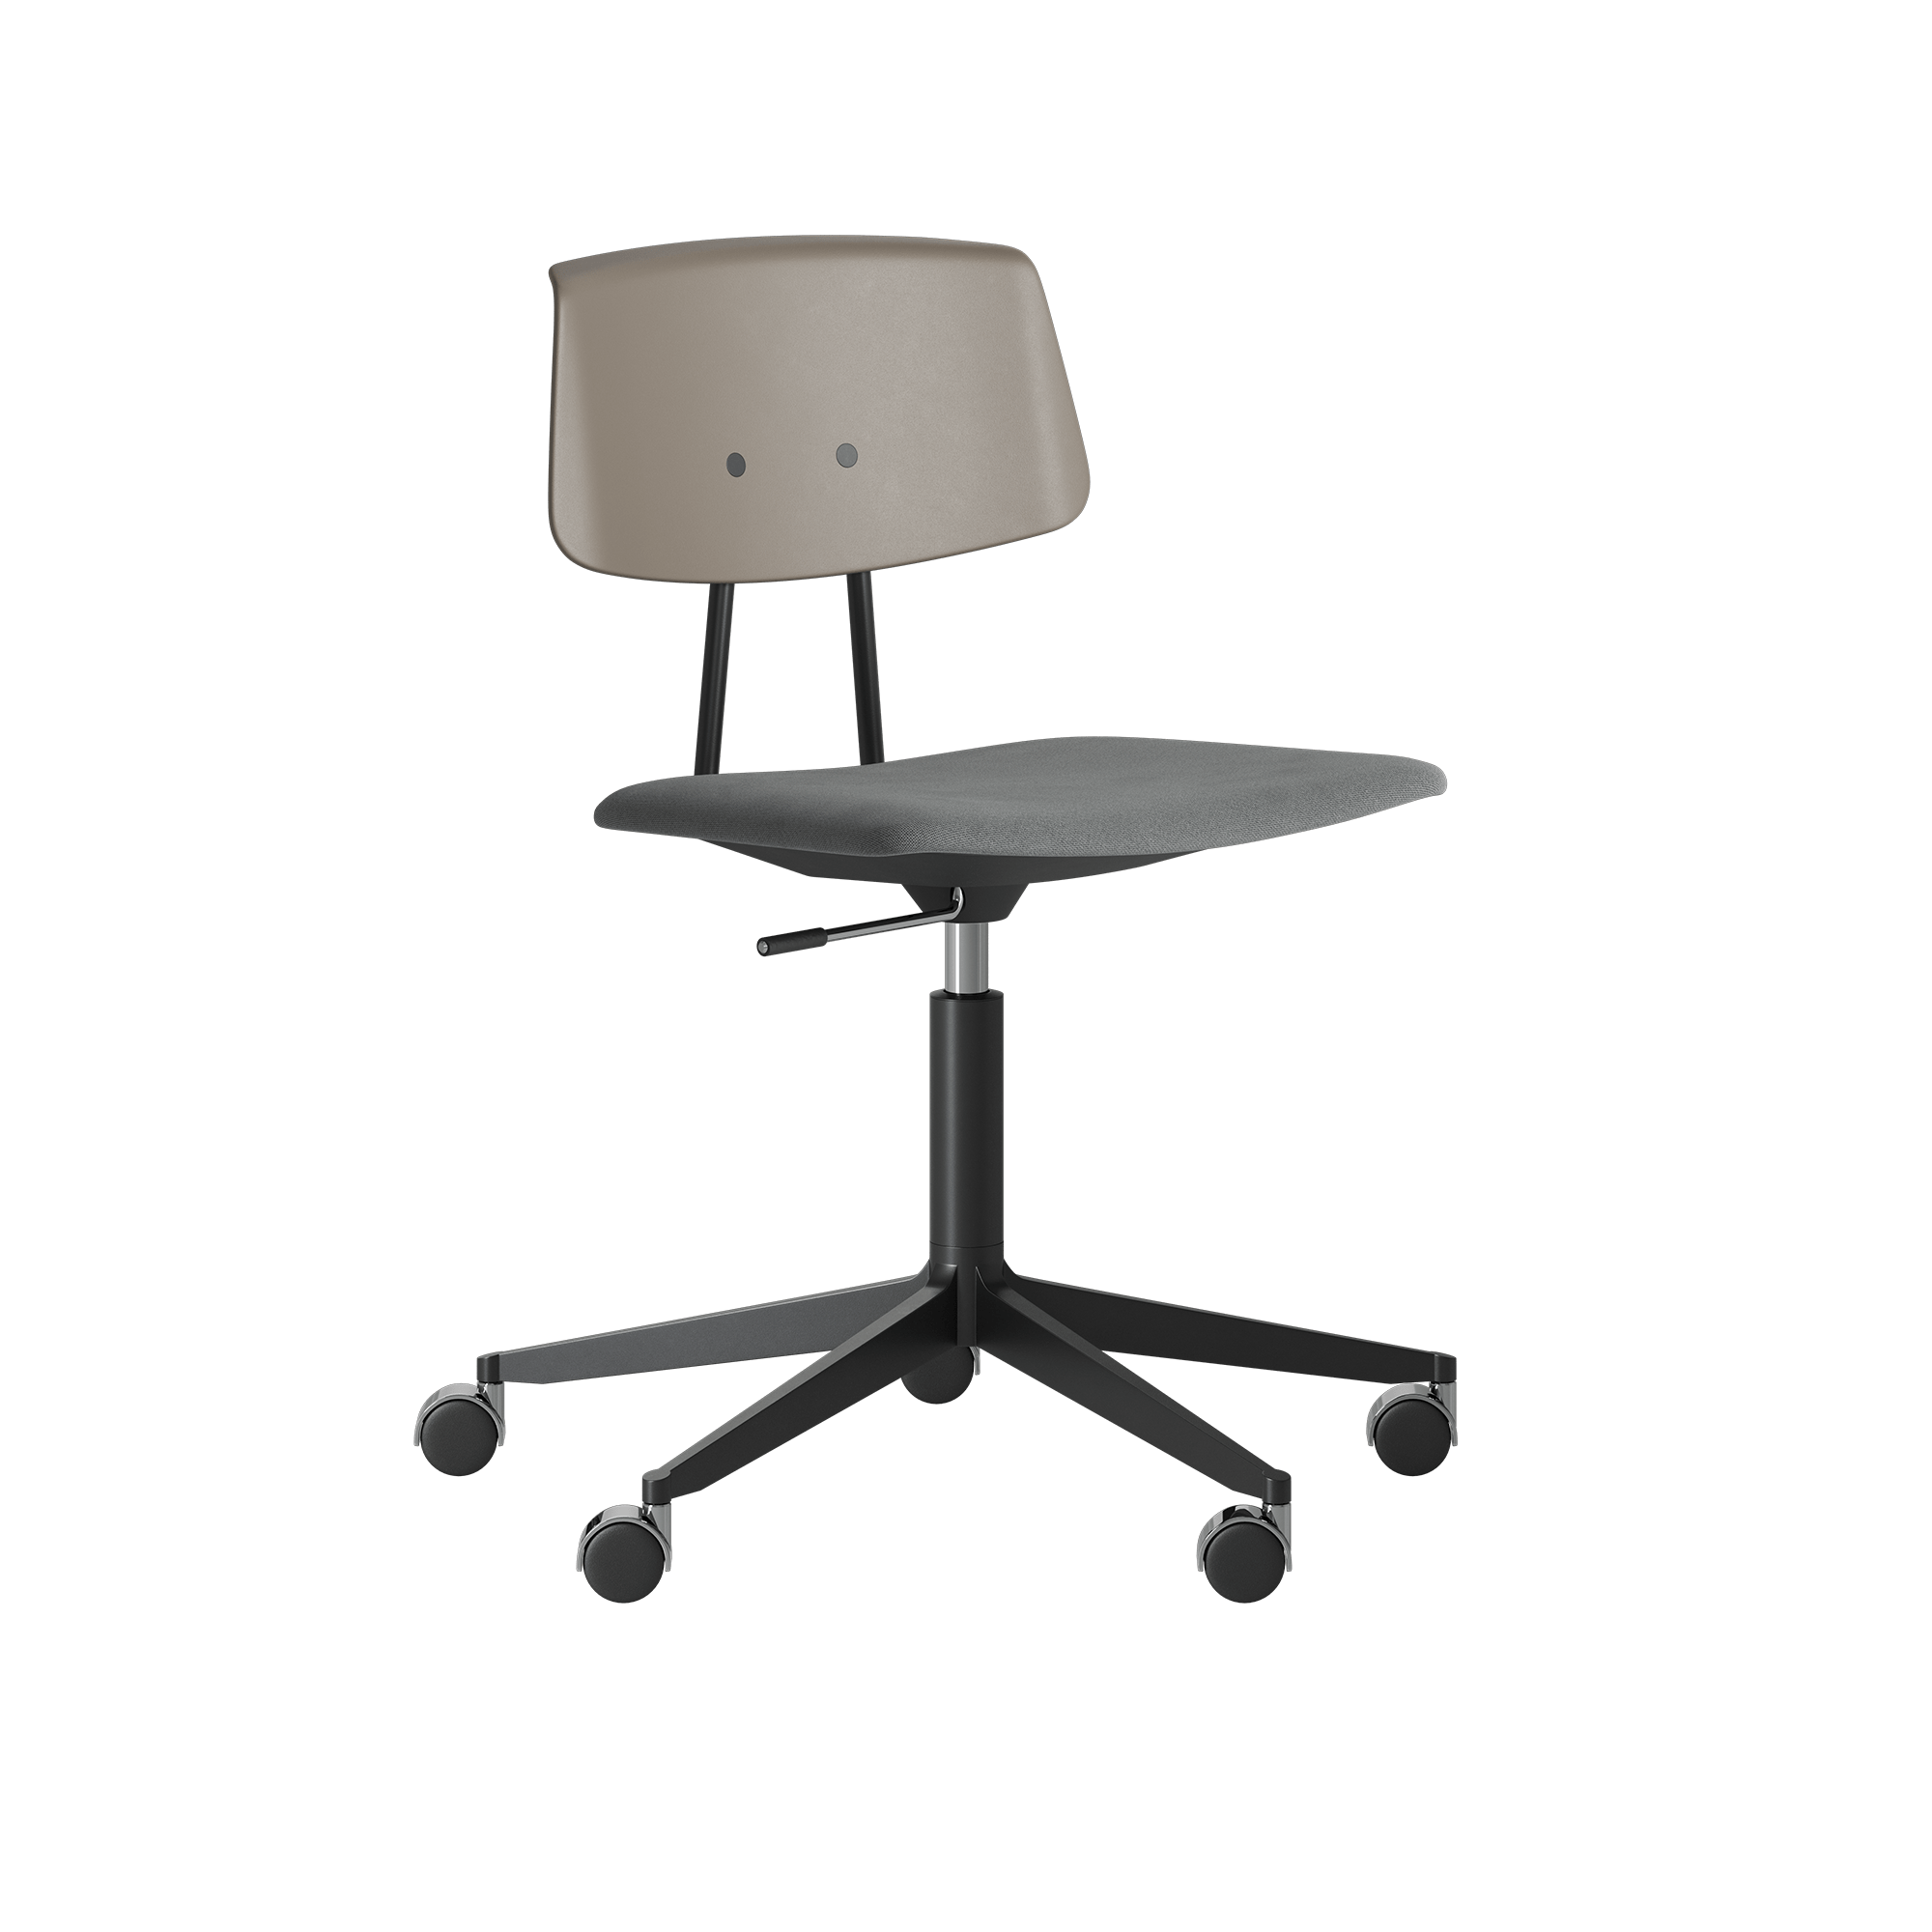 A Share Move Alu 10 office desk chair